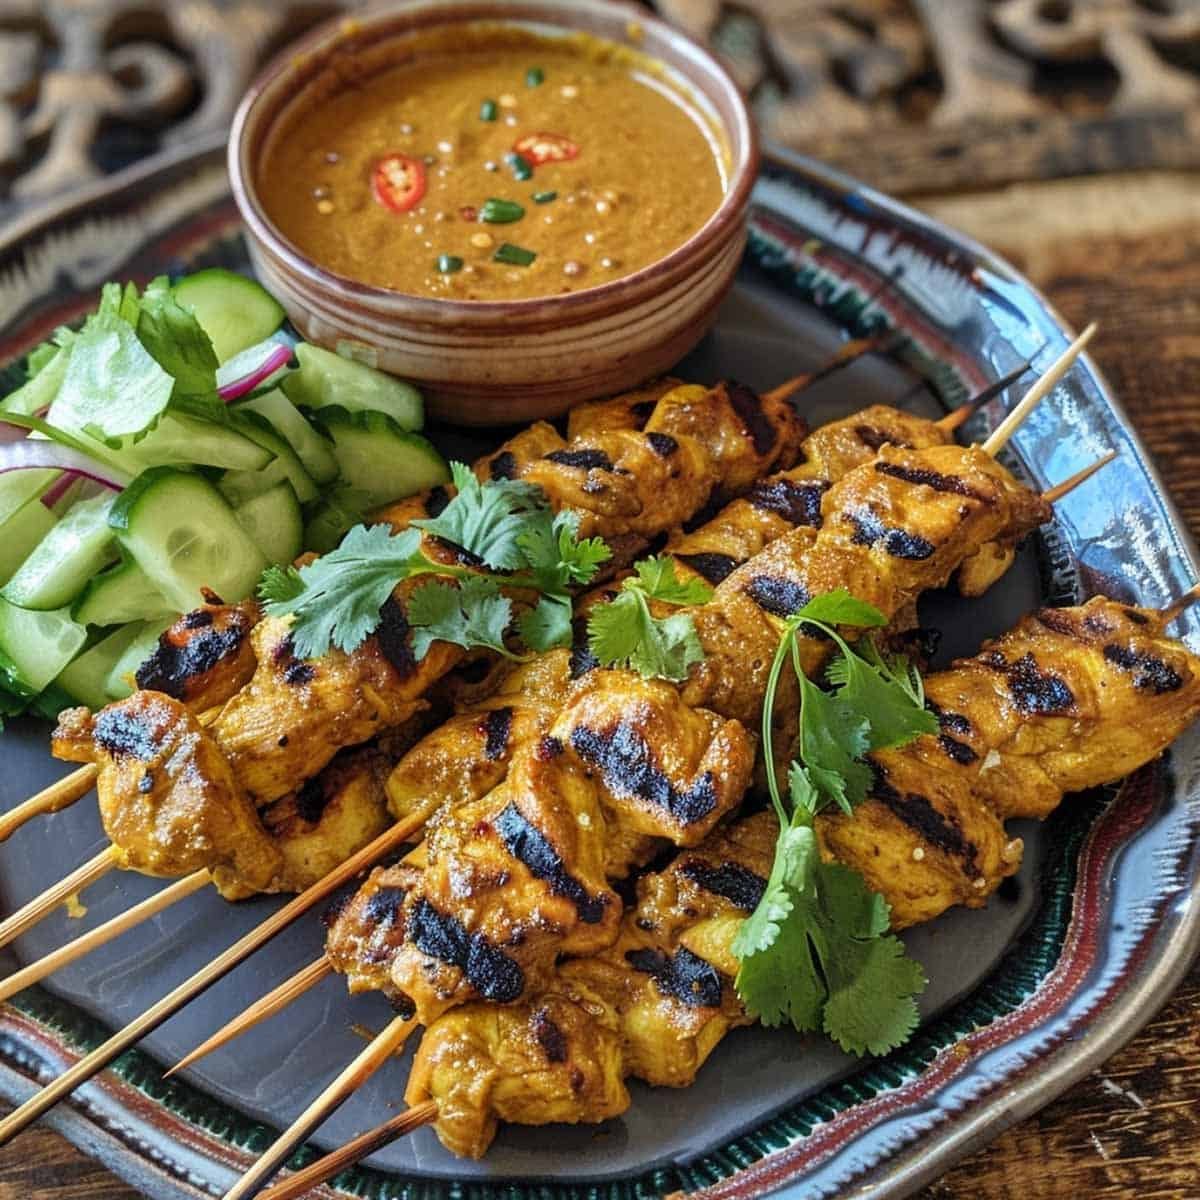 Plate of Thai Chicken Satay (Satay Gai) with peanut butter sauce, garnished with  cilantro